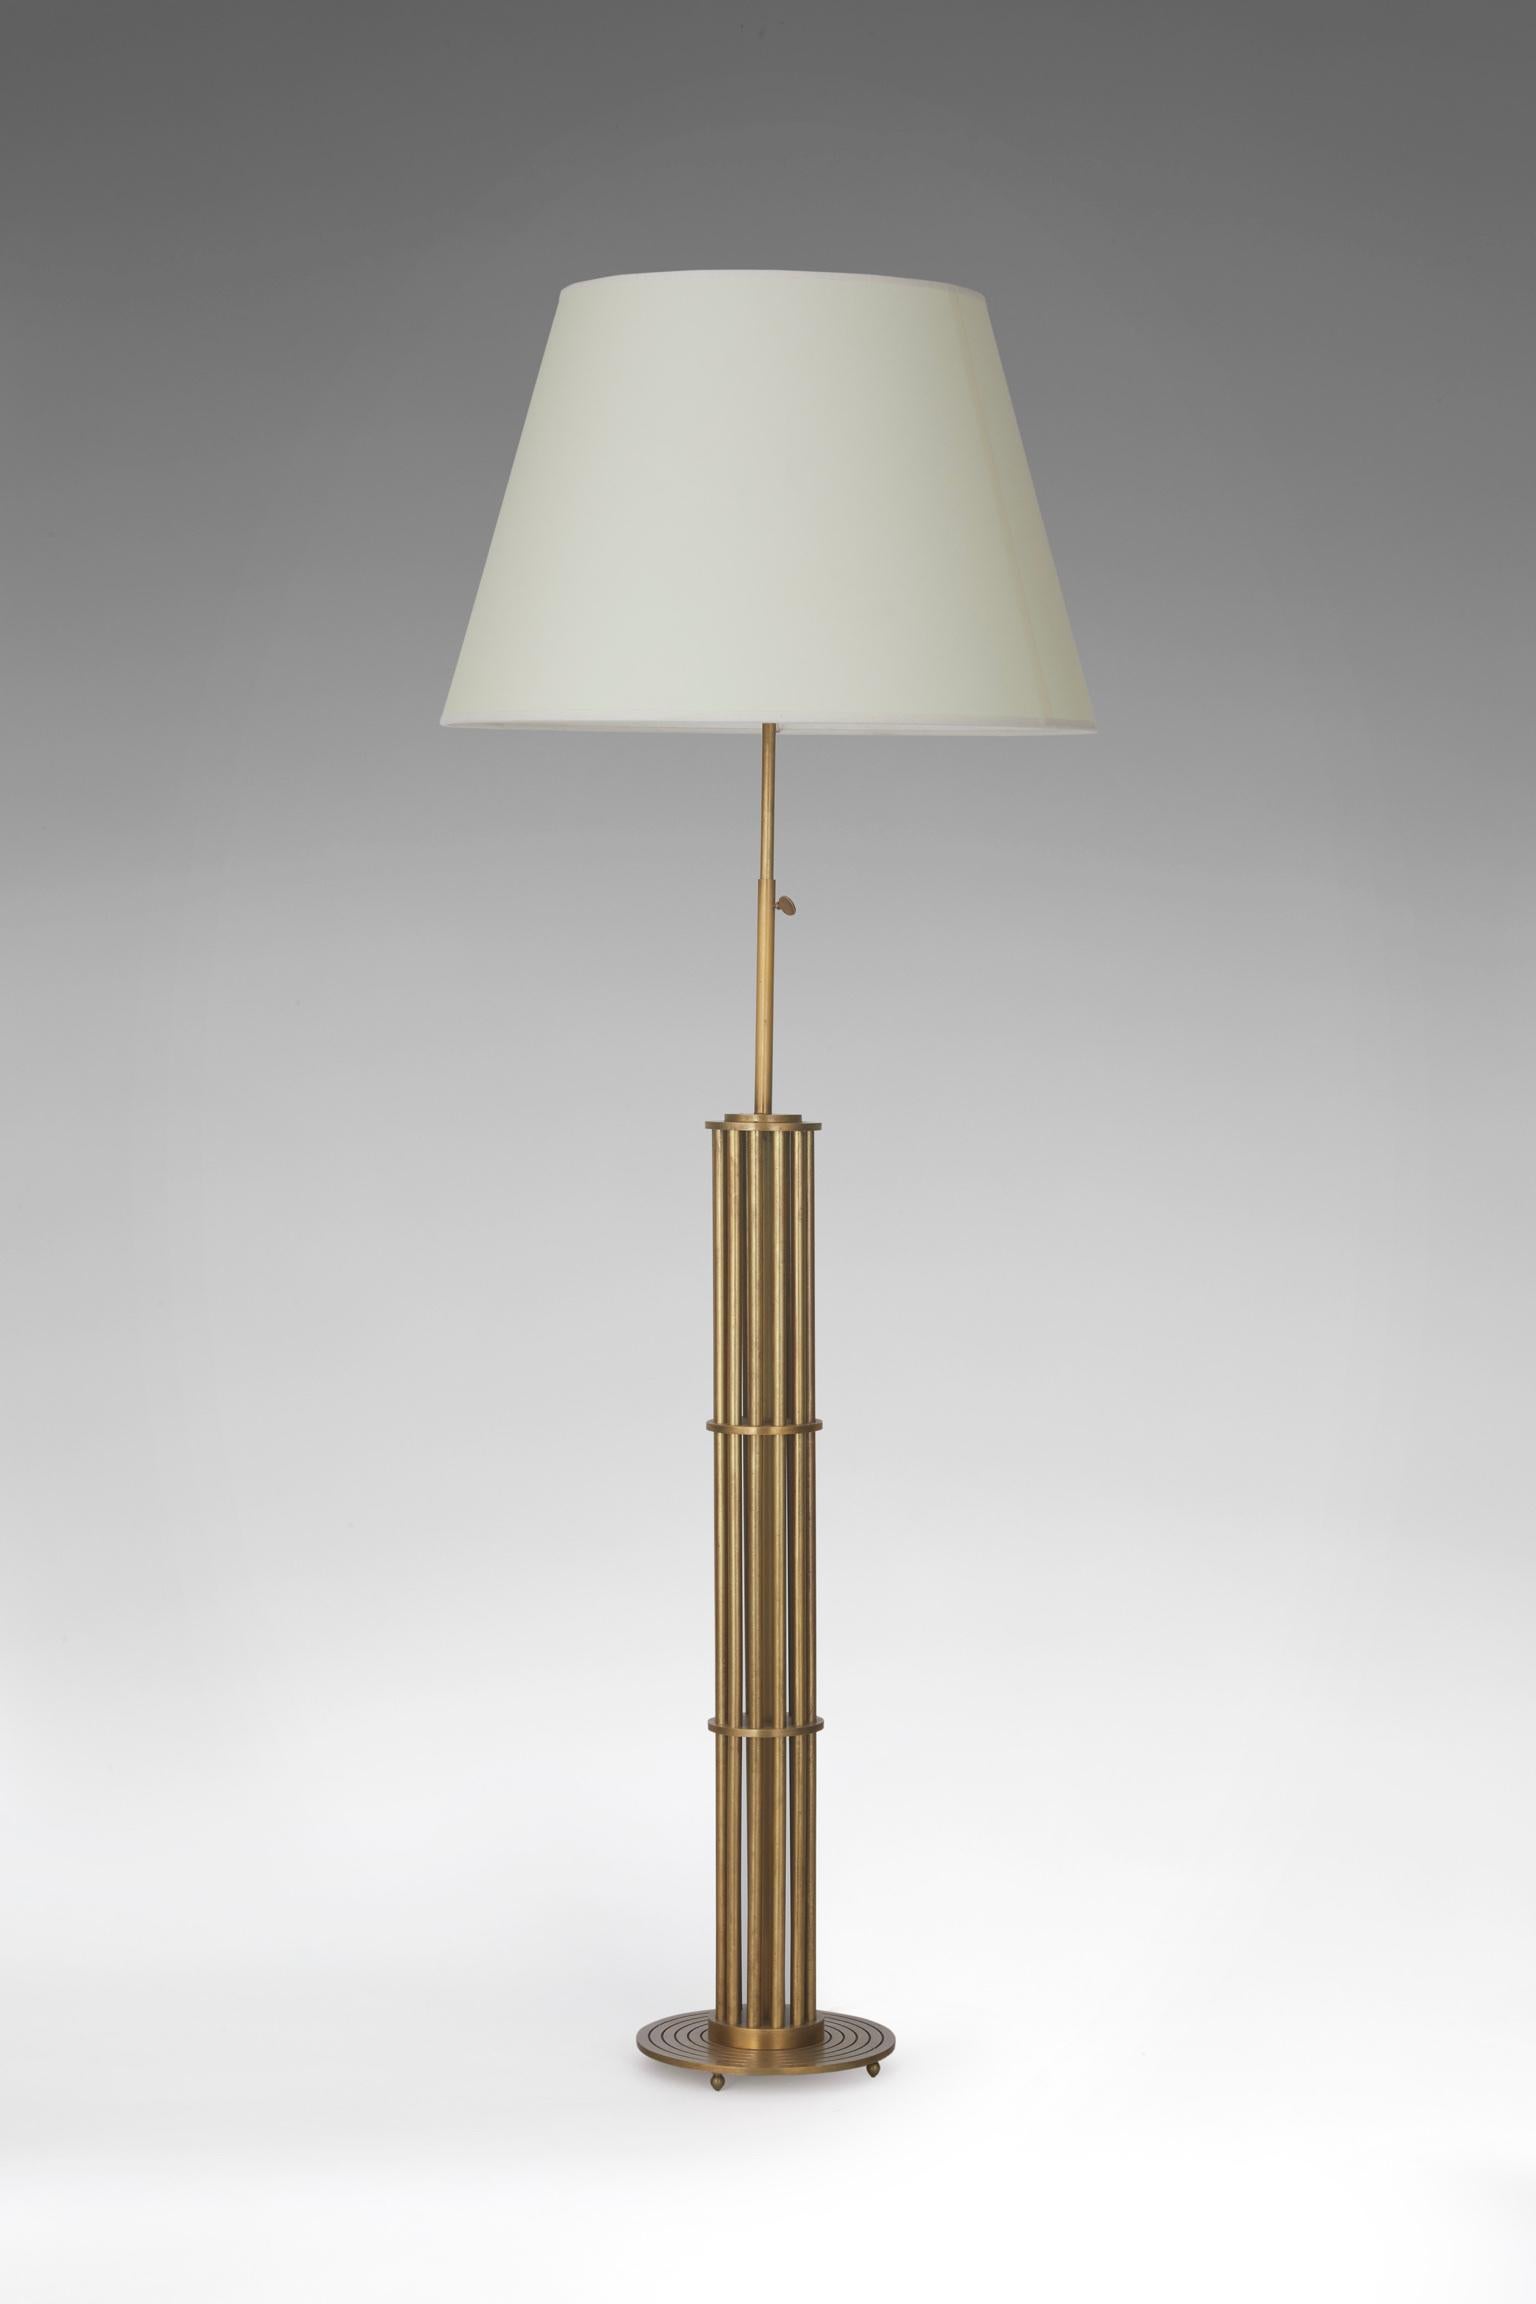 With a patinated brass base composed by tubes forming a cylindrical cage on a circular flat grooved base. Adjustable height from 47.2-53.2 in with the lampshade.